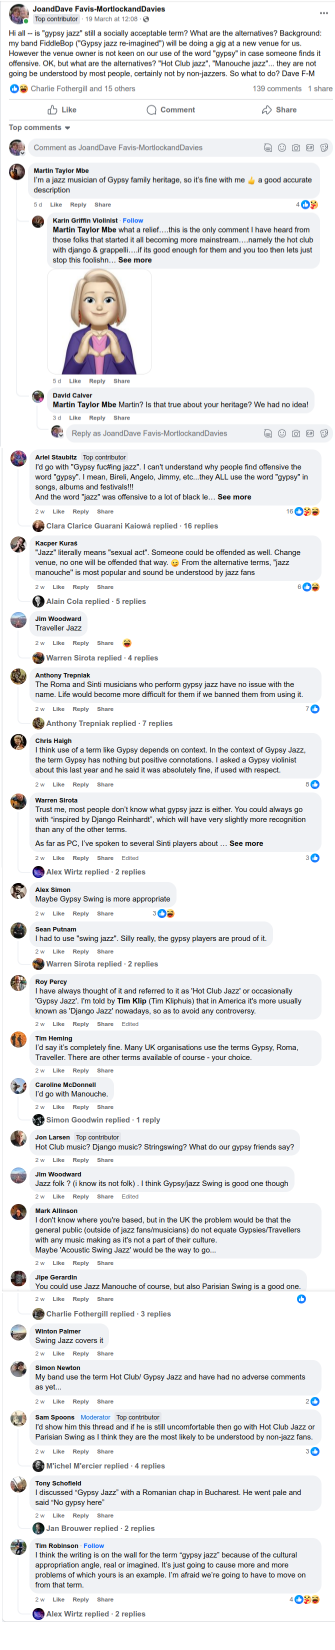 Part of the discussion on 'is gypsy jazz still a socially acceptable term?' on the Gypsy Jazz UK Facebook group